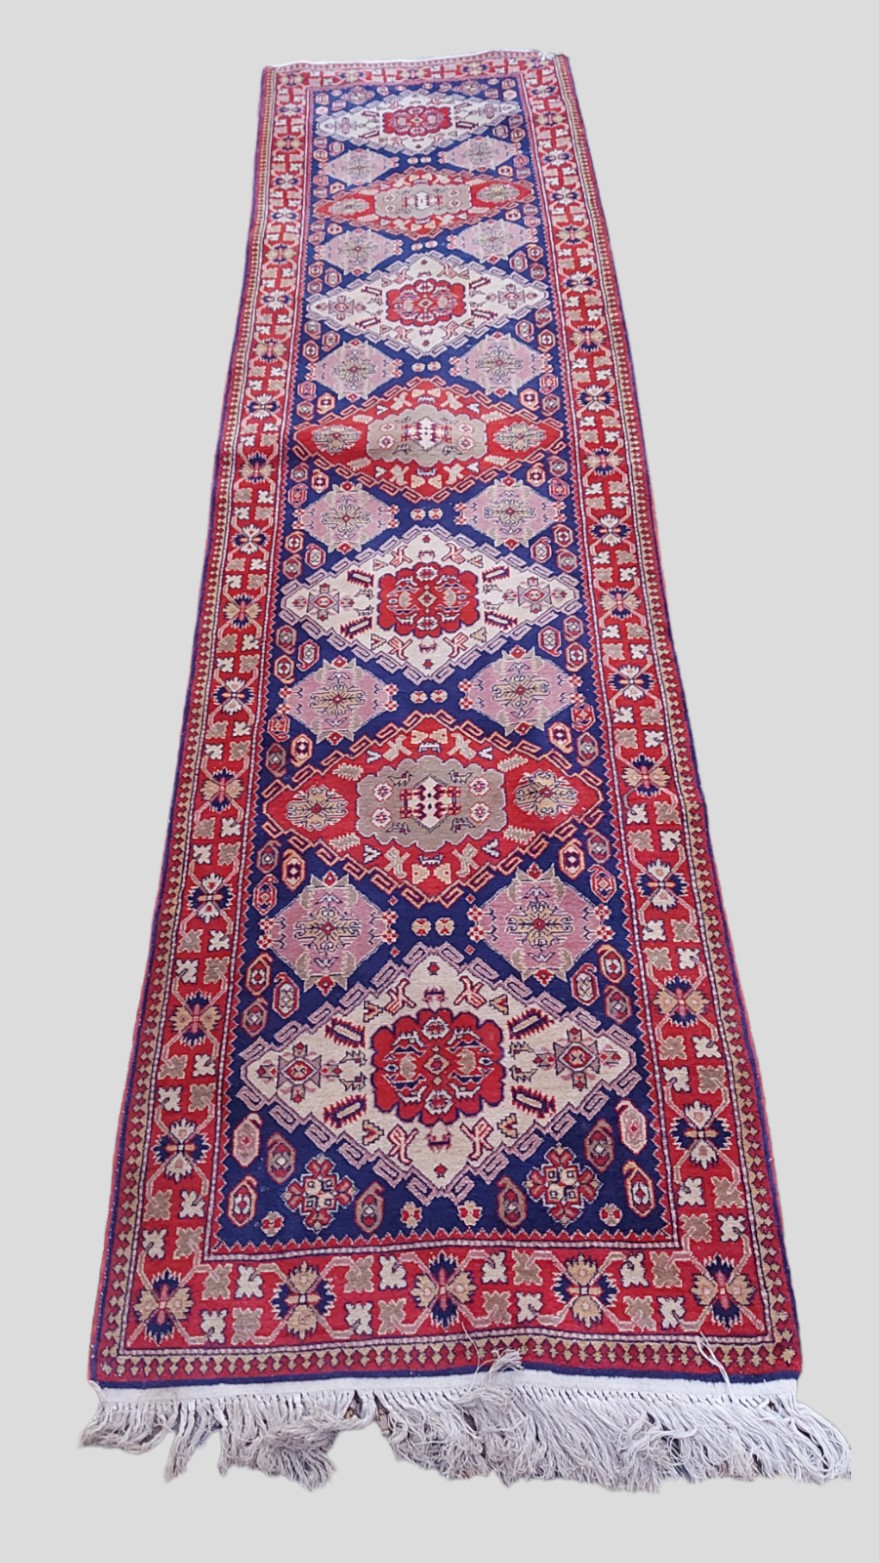 A North west Persian woollen runner with an all over design upon a blue, red and cream ground within